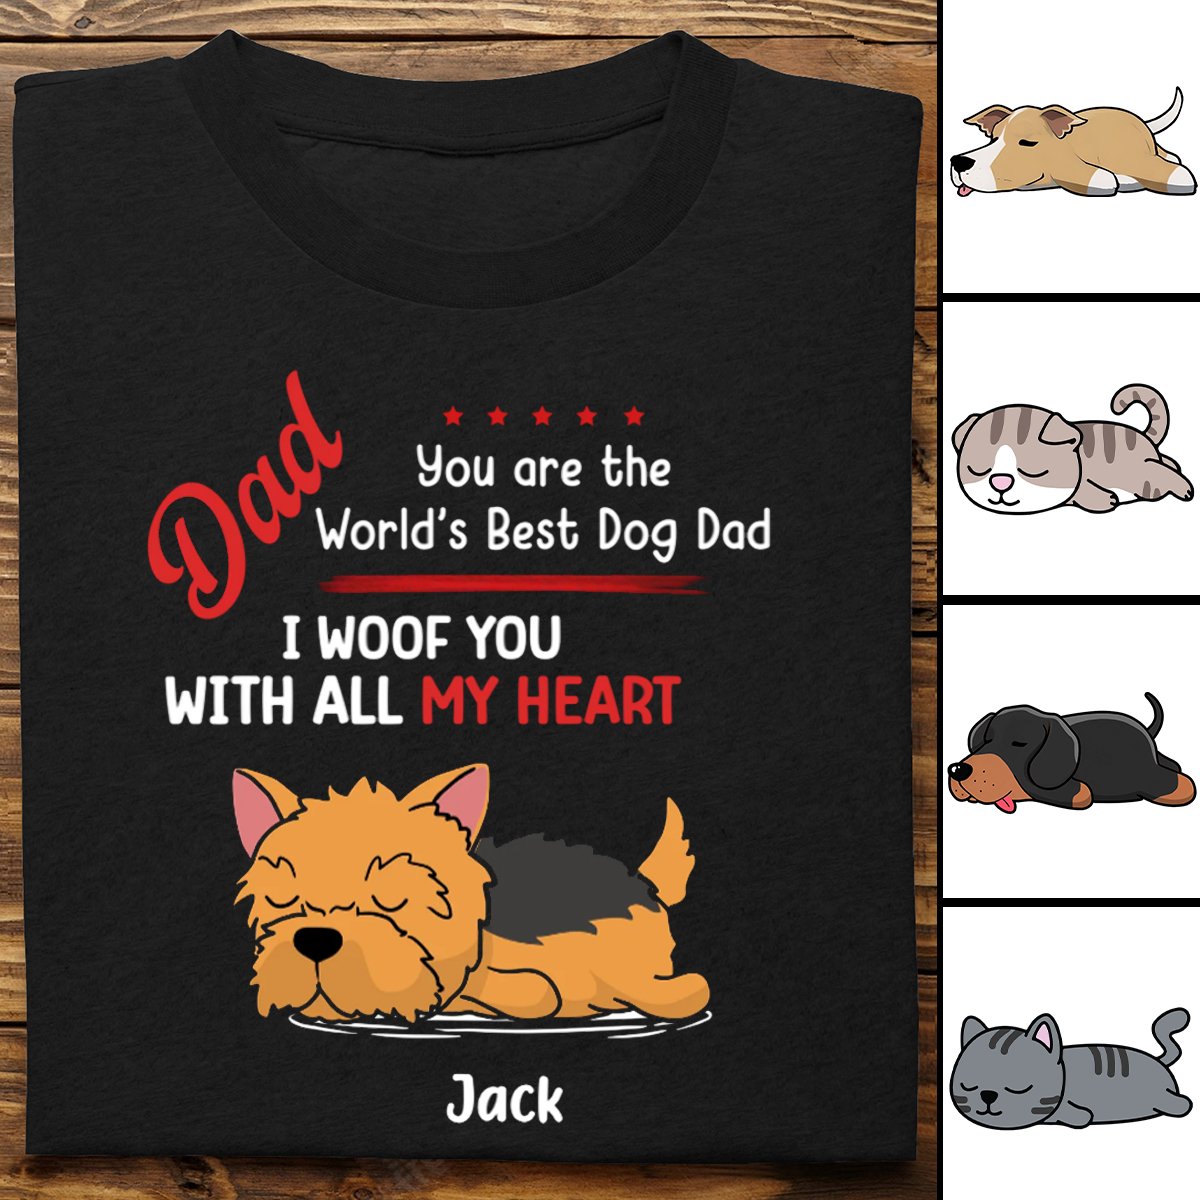 Discover Pet Lovers - Woof All My Heart - Personalized Unisex T-shirt